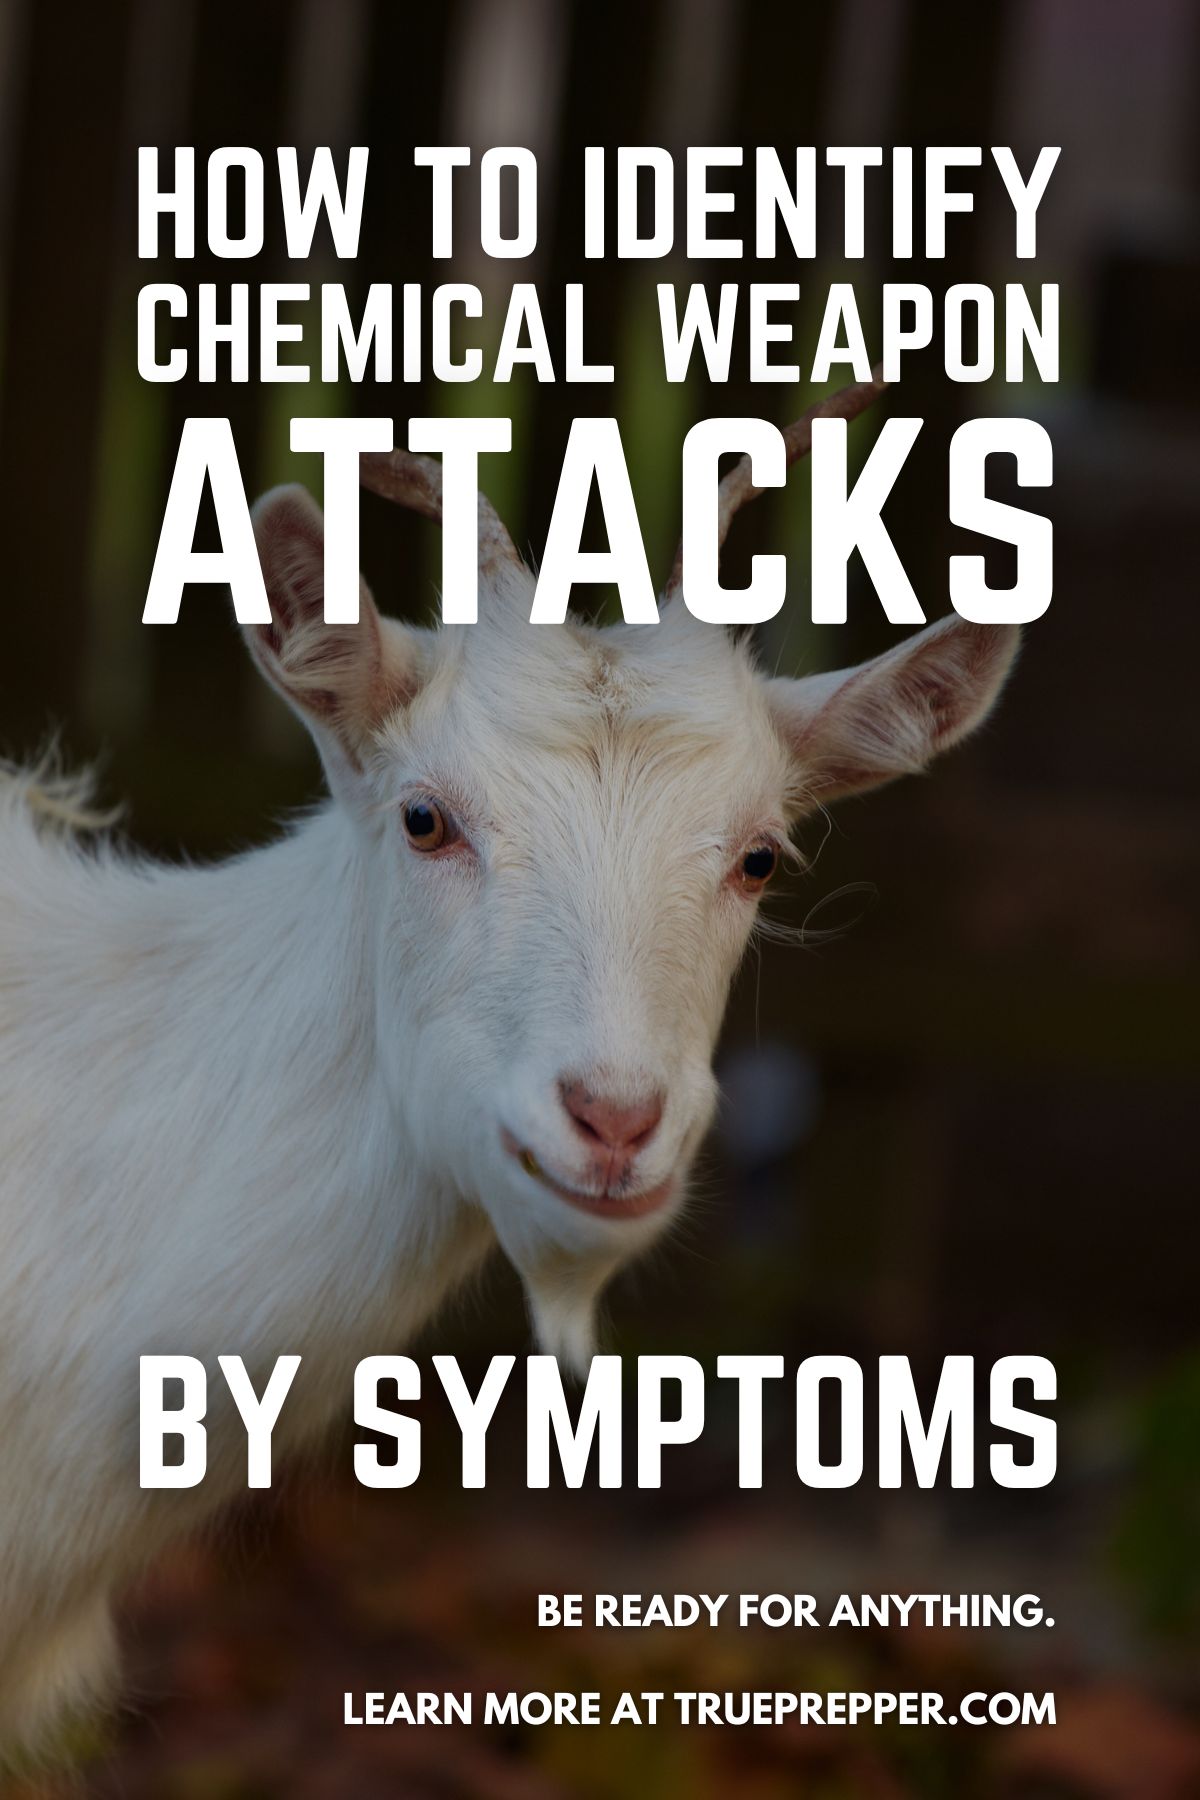 How to Identify Chemical Weapon Attacks by Symptoms